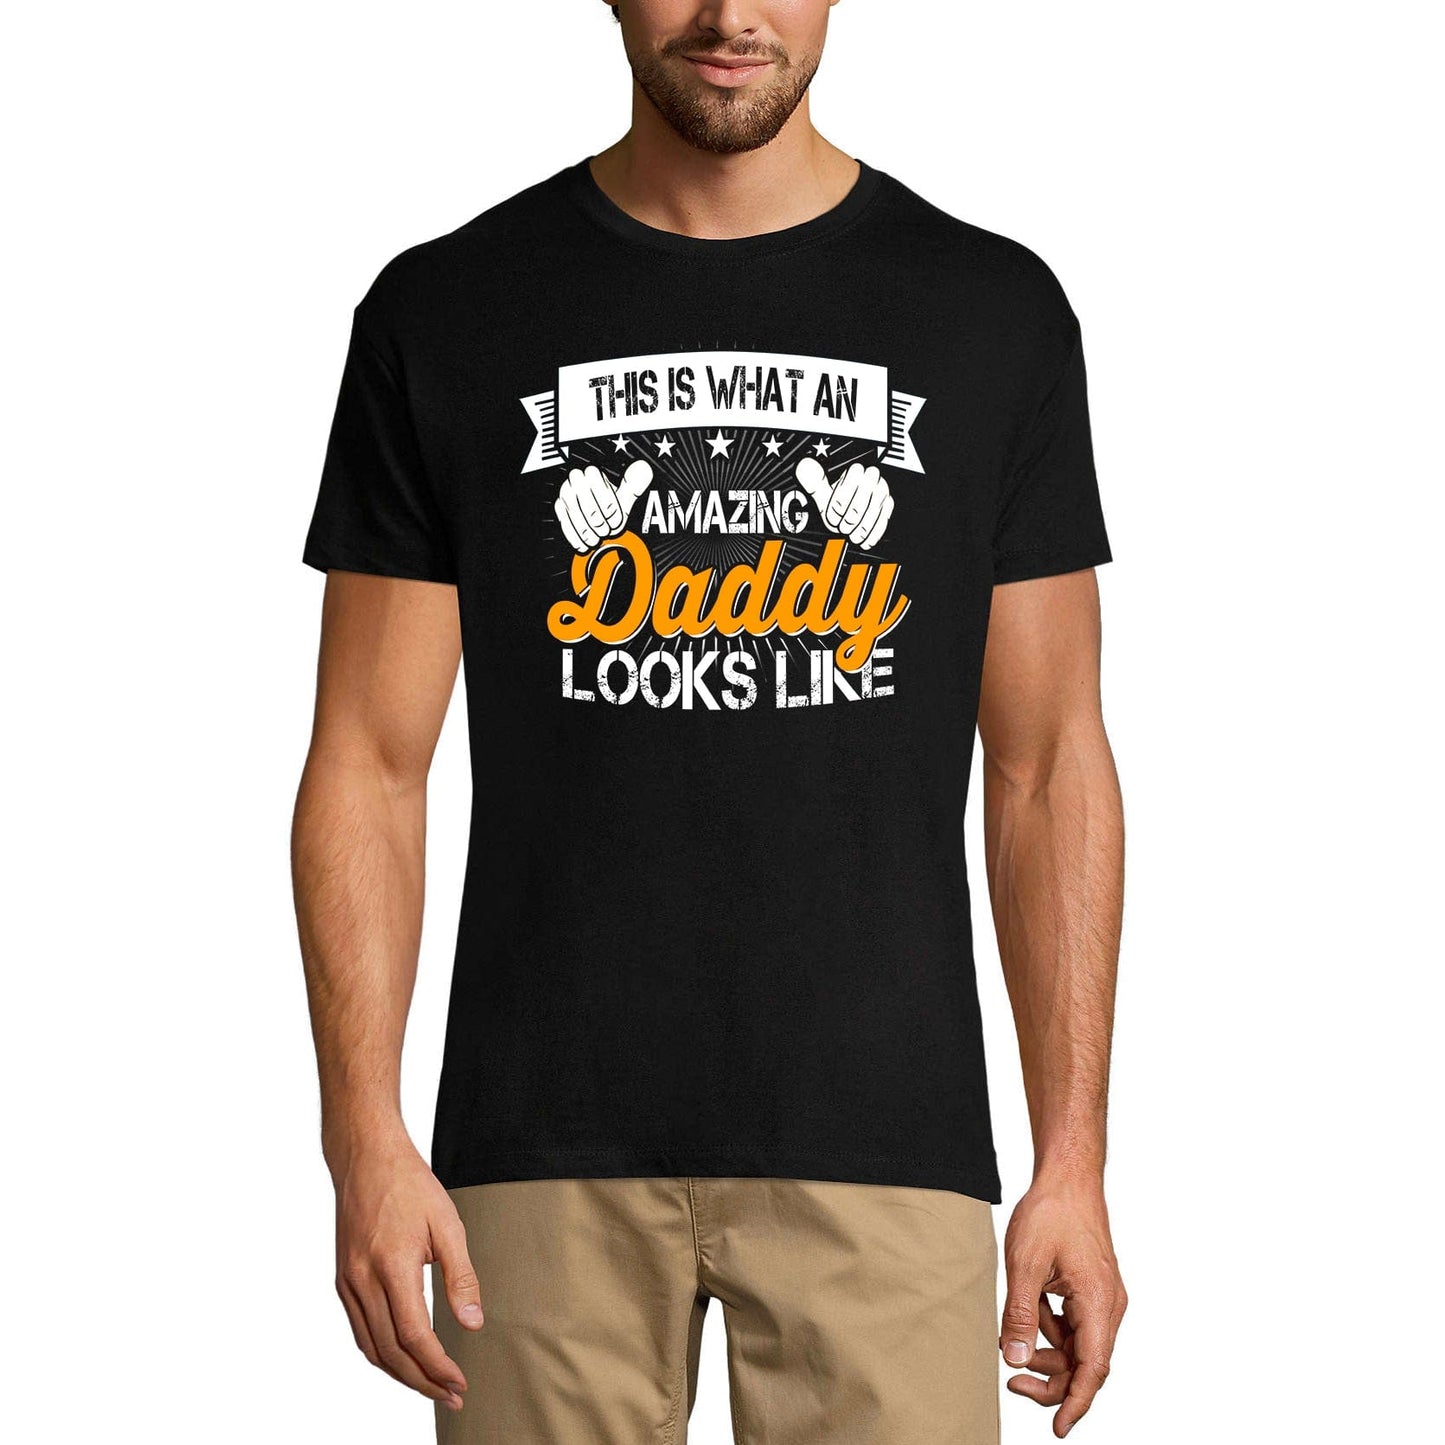 ULTRABASIC Men's T-Shirt This is What an Amazing Daddy Looks Like Tee Shirt